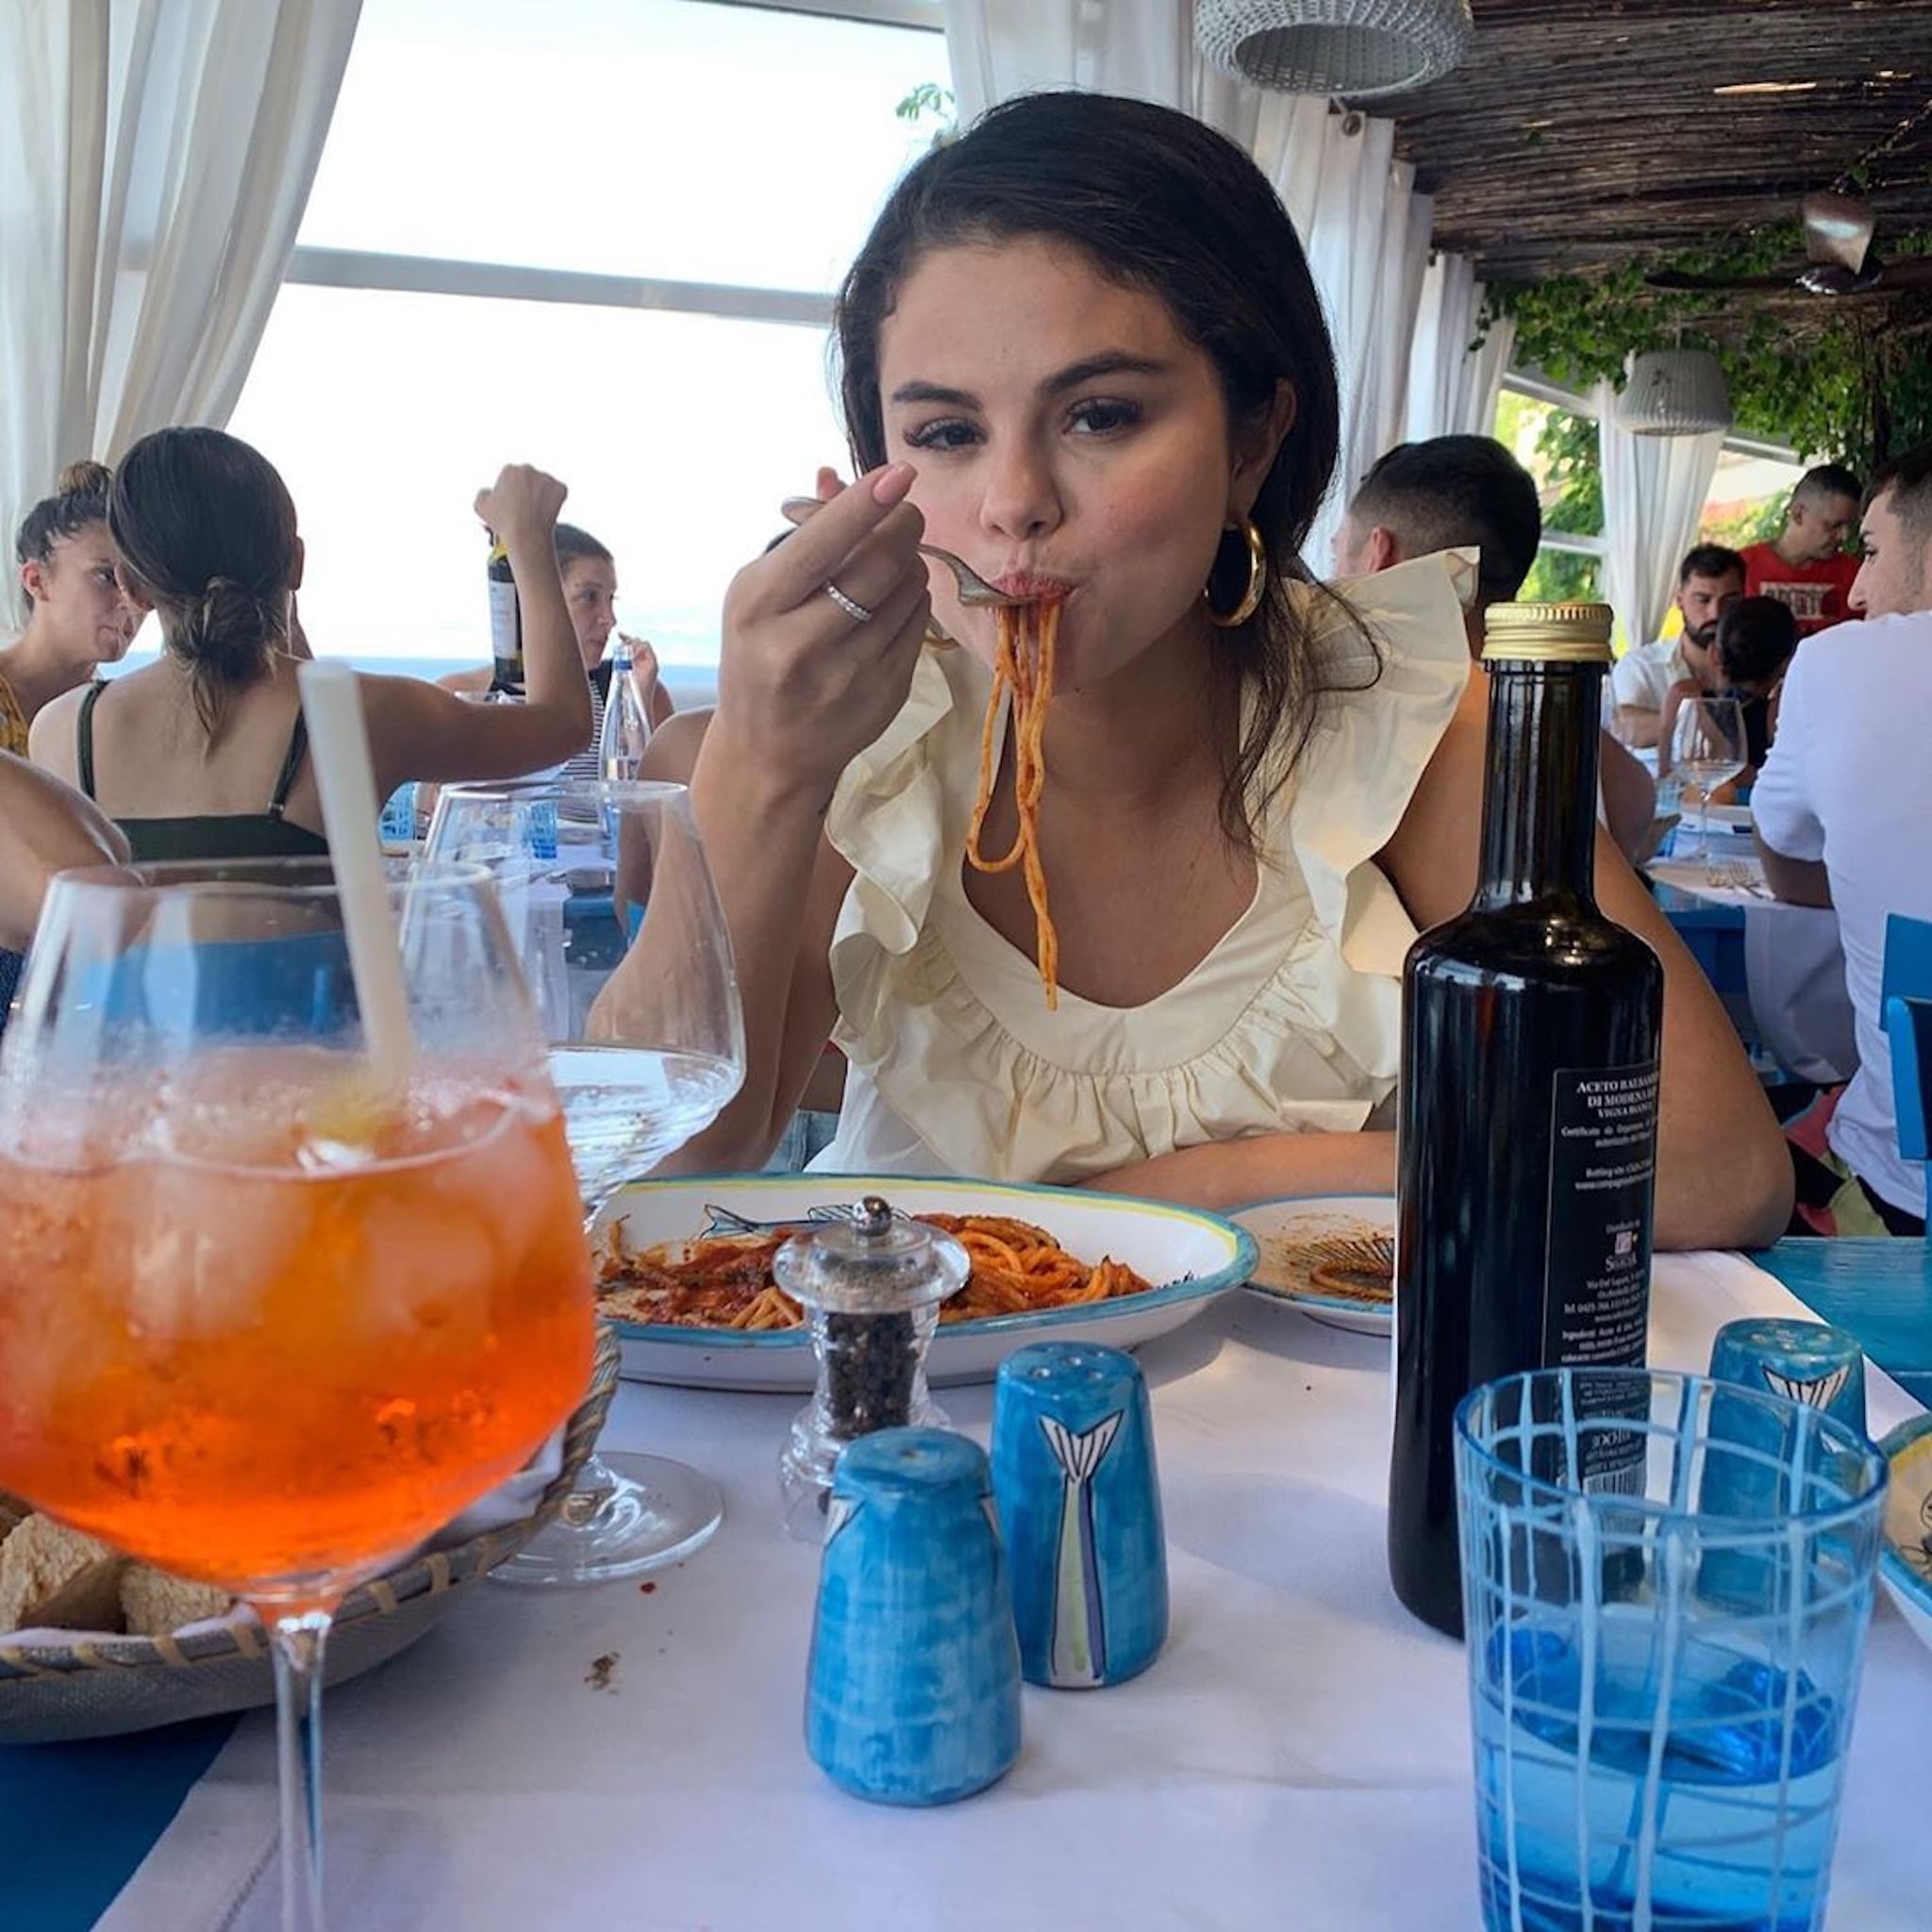 Selena Gomez Wears a Cute White Maxi Dress and Straw Hat in Italy